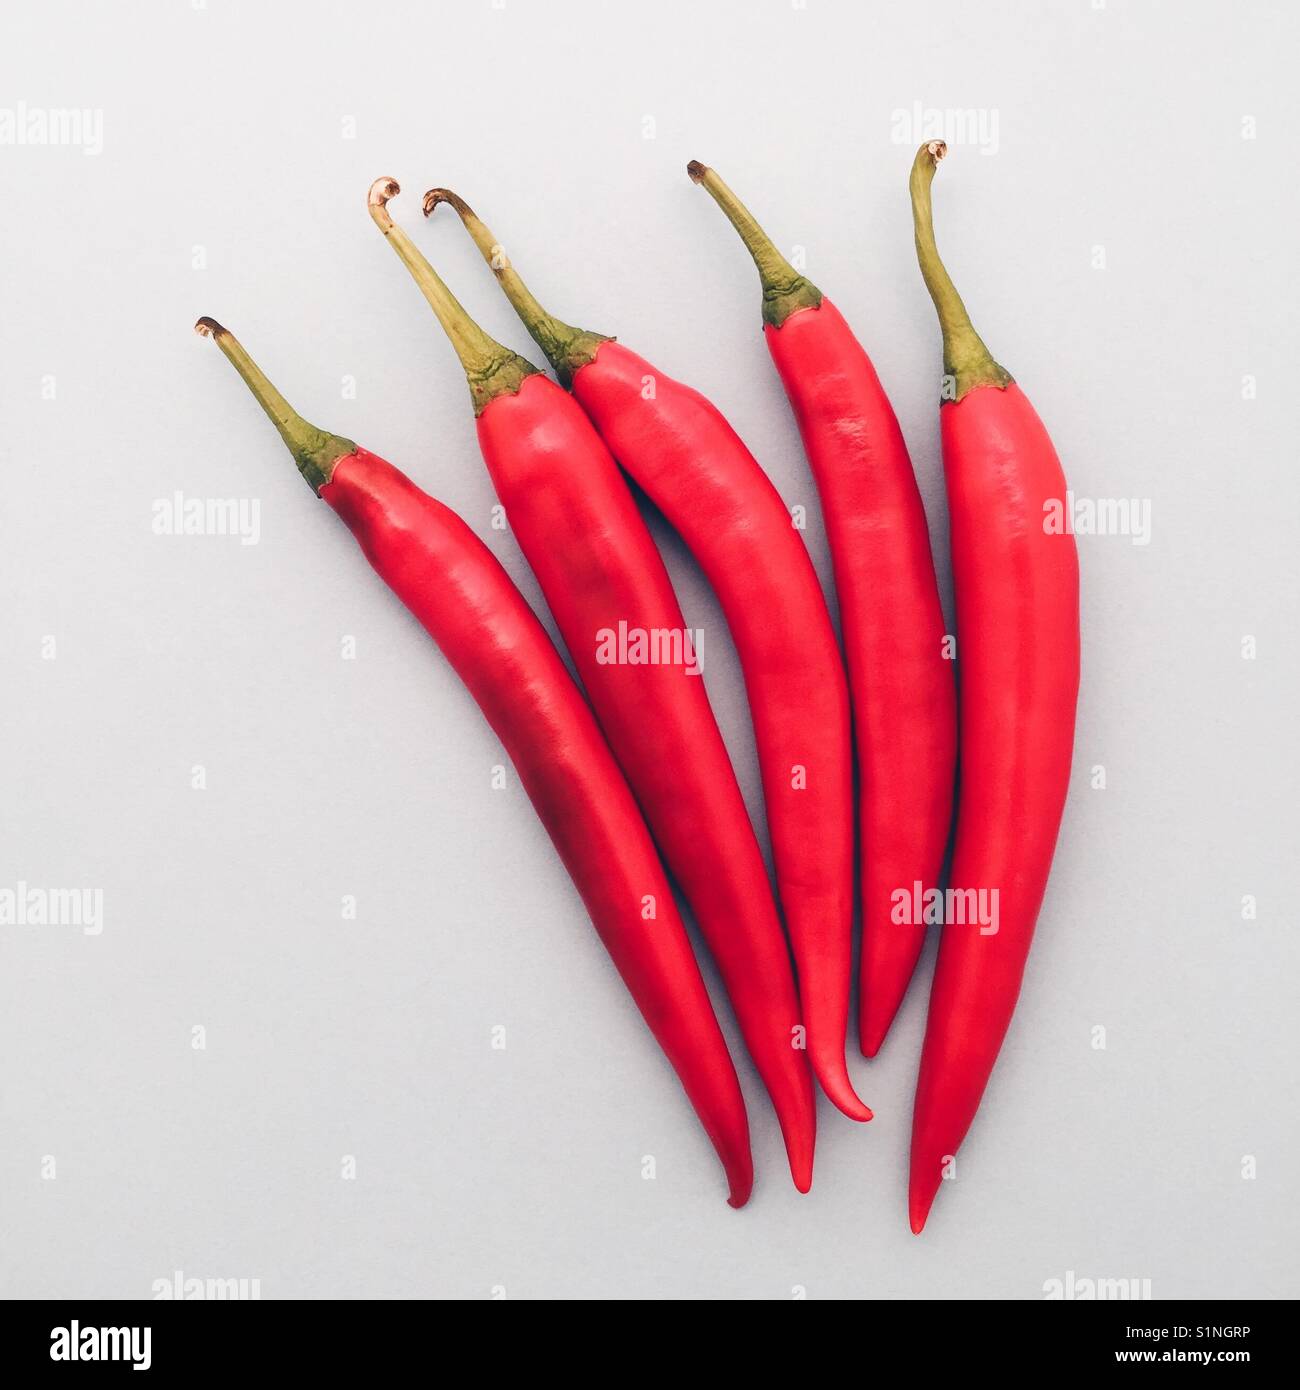 Overhead of five spicy hot red peppers on a pale blue background Stock Photo